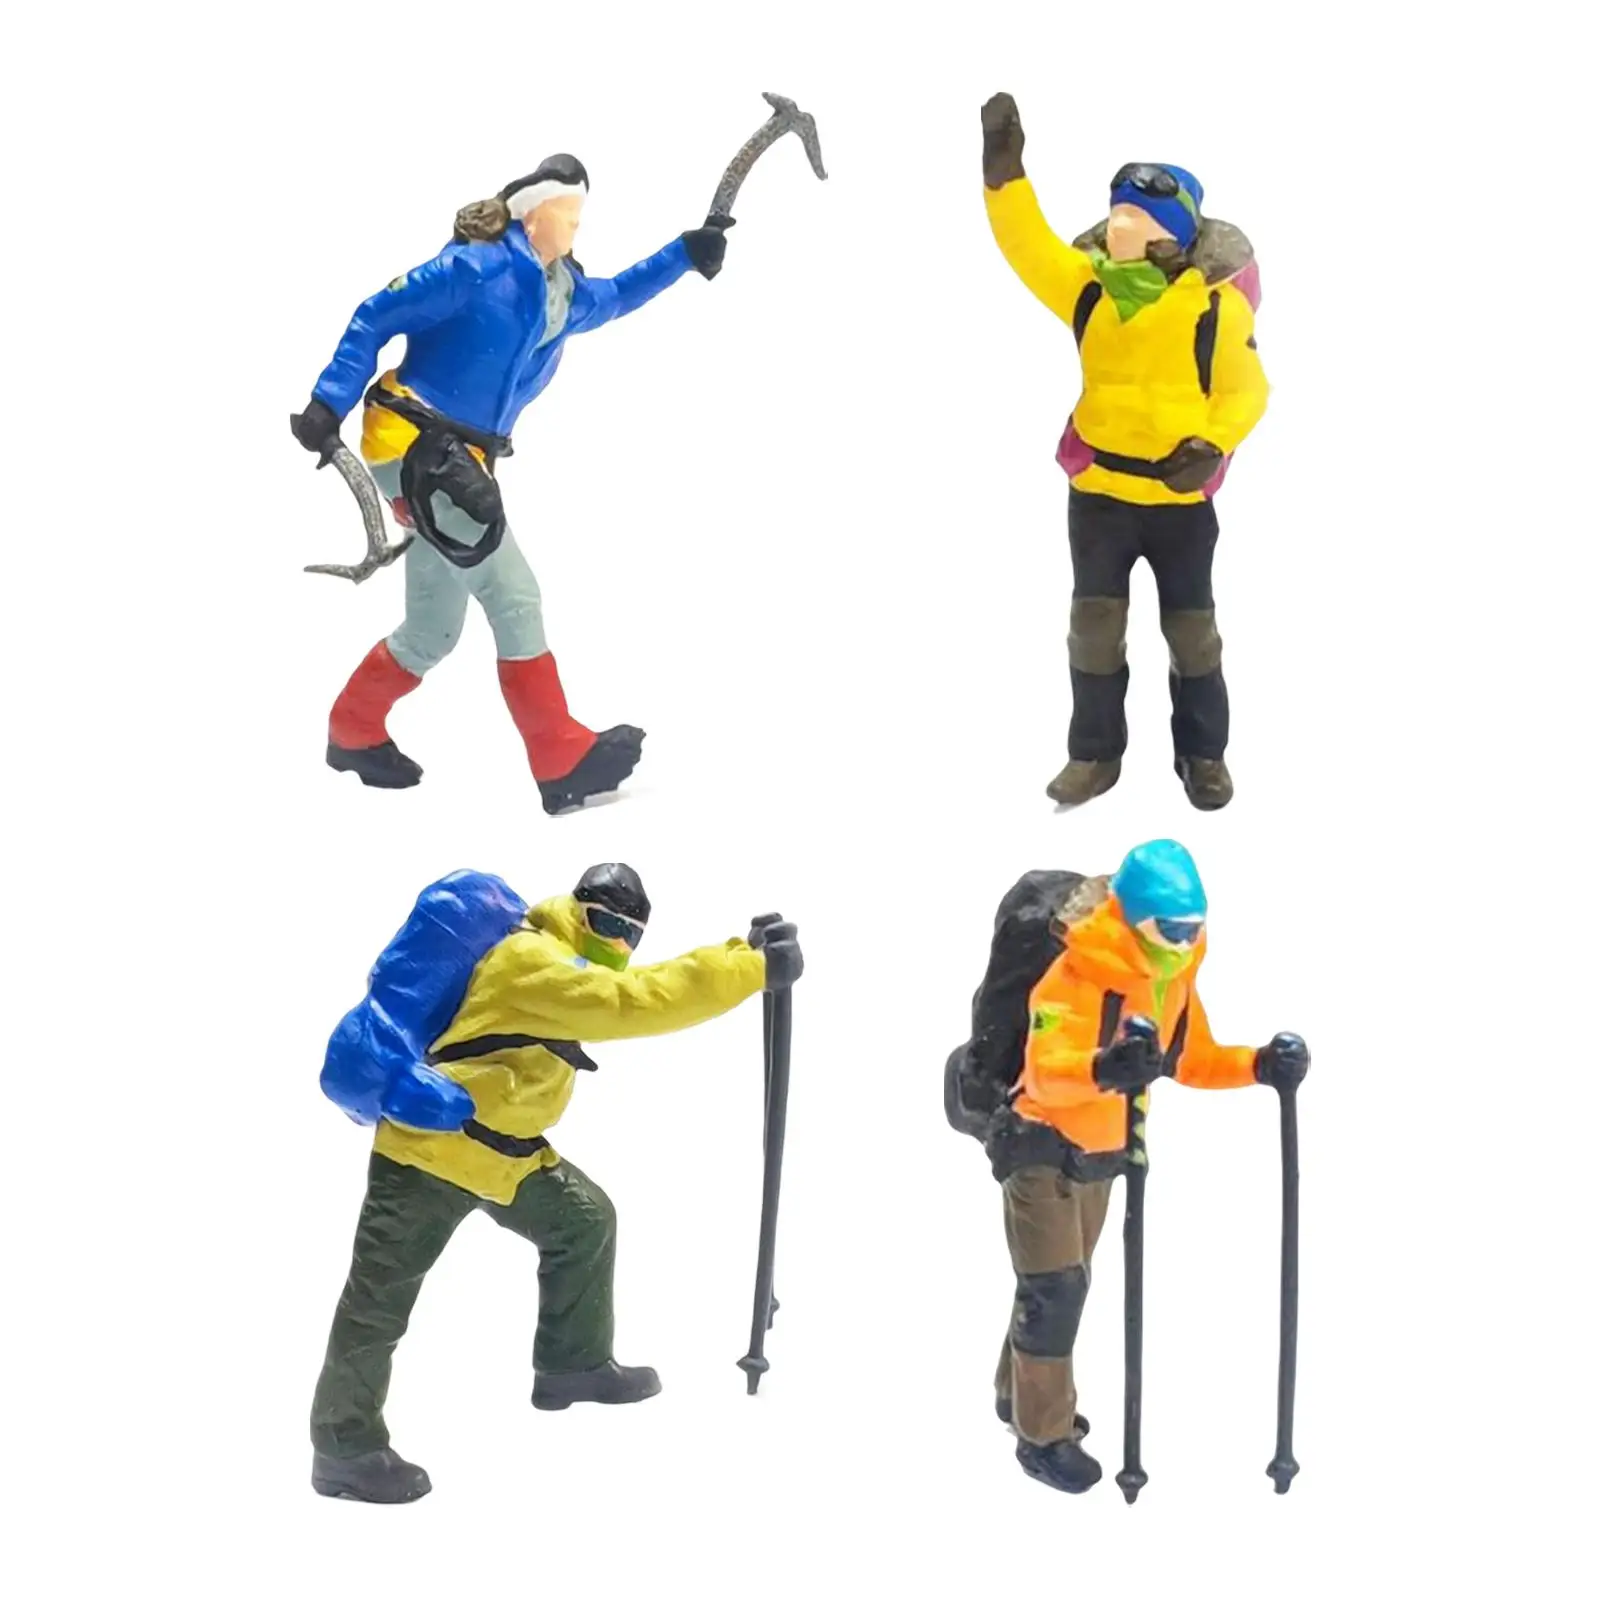 4Pcs Painted Figures Dollhouse People Action Figure for Indoor Dollhouse